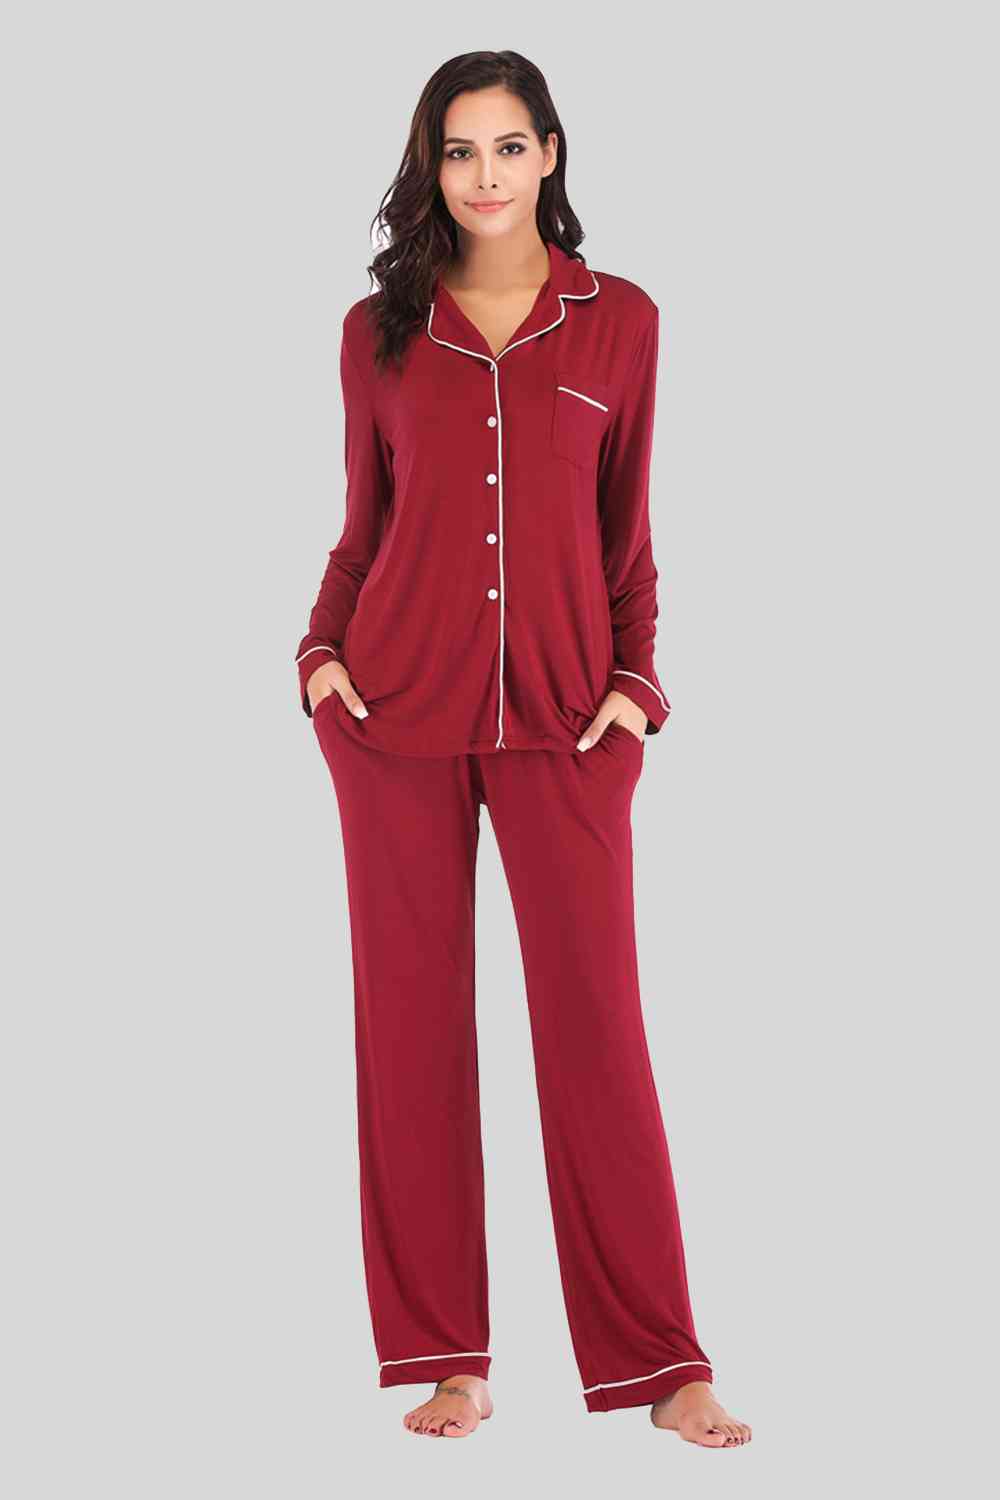 Collared Neck Long Sleeve Loungewear Set with Pockets Wine